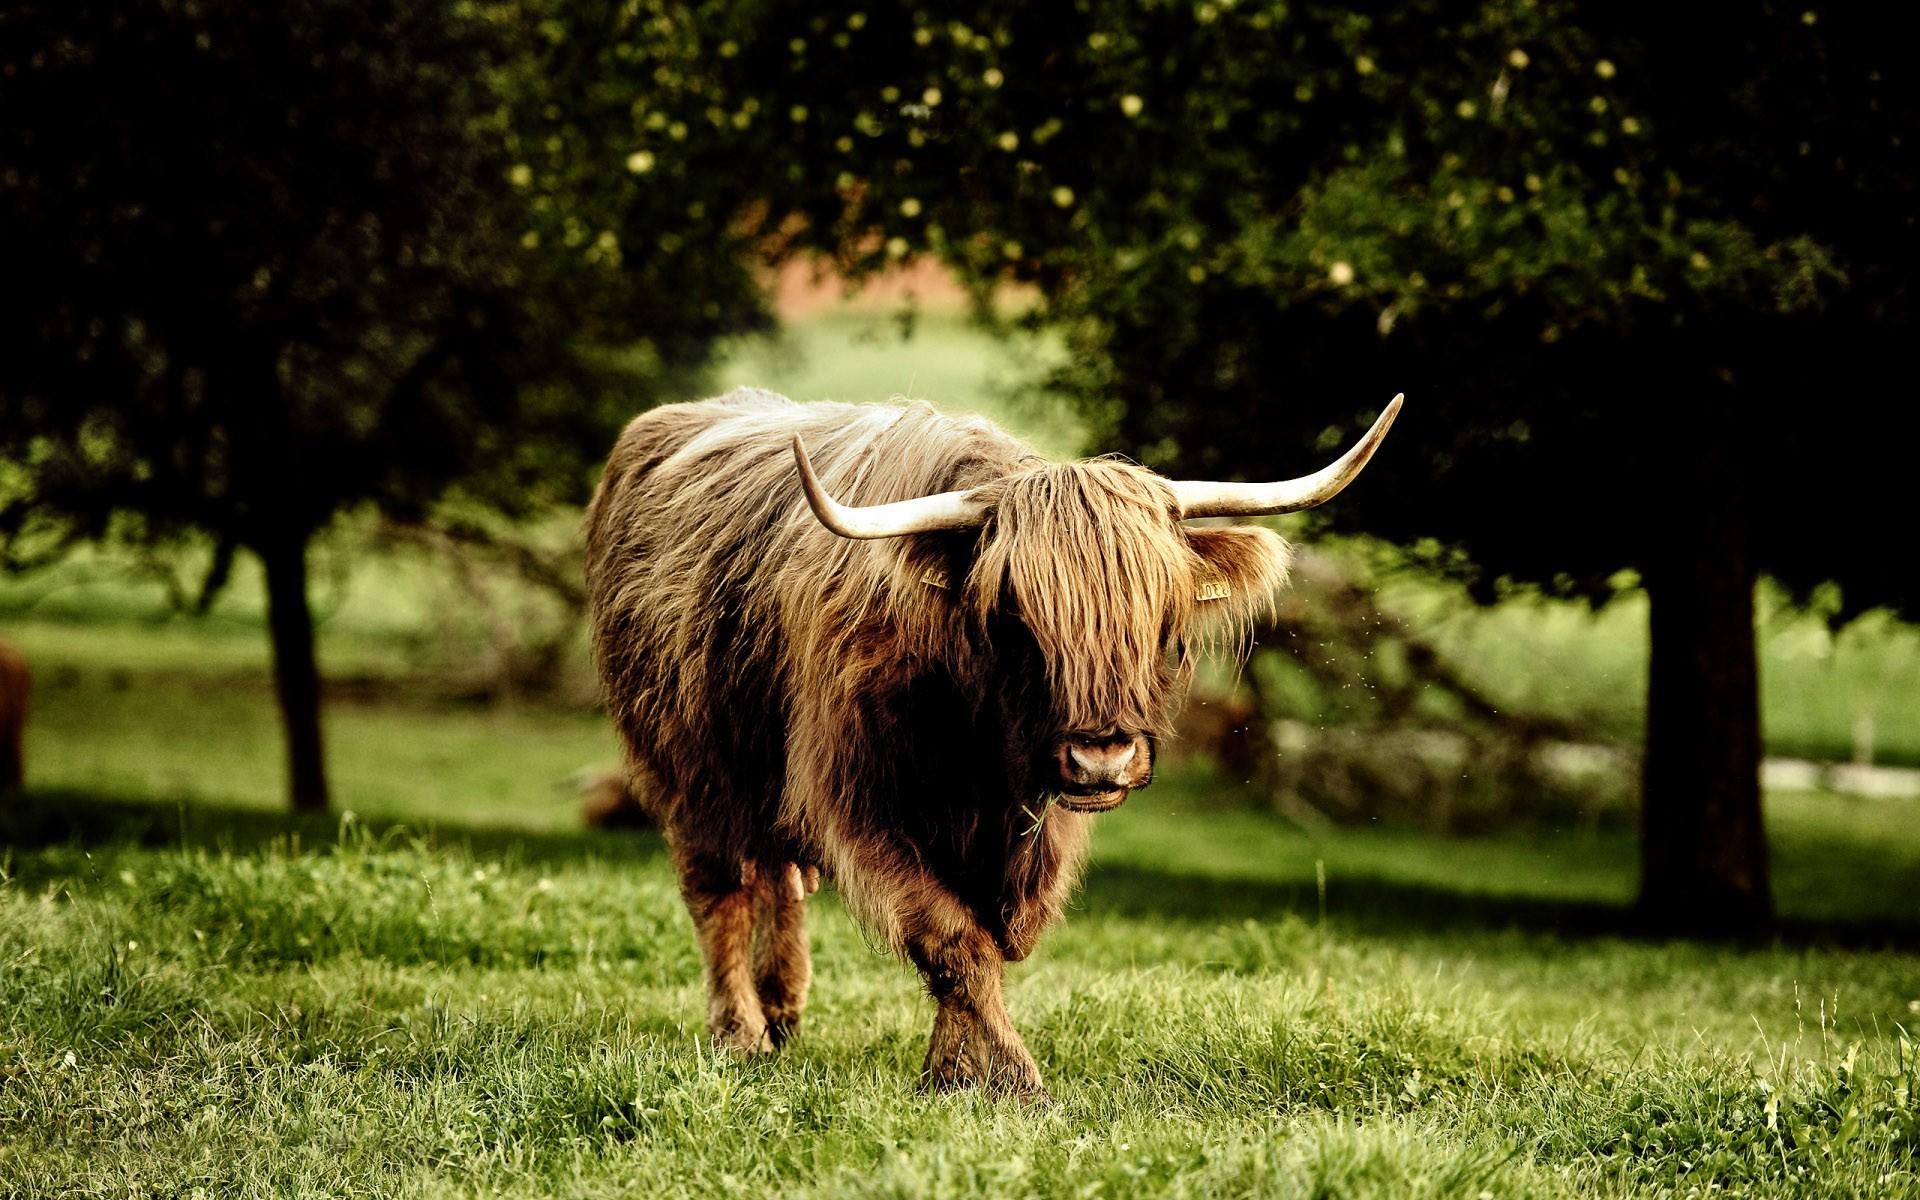 Silly Highland Cow Sketch Wallpaper Backgrounds